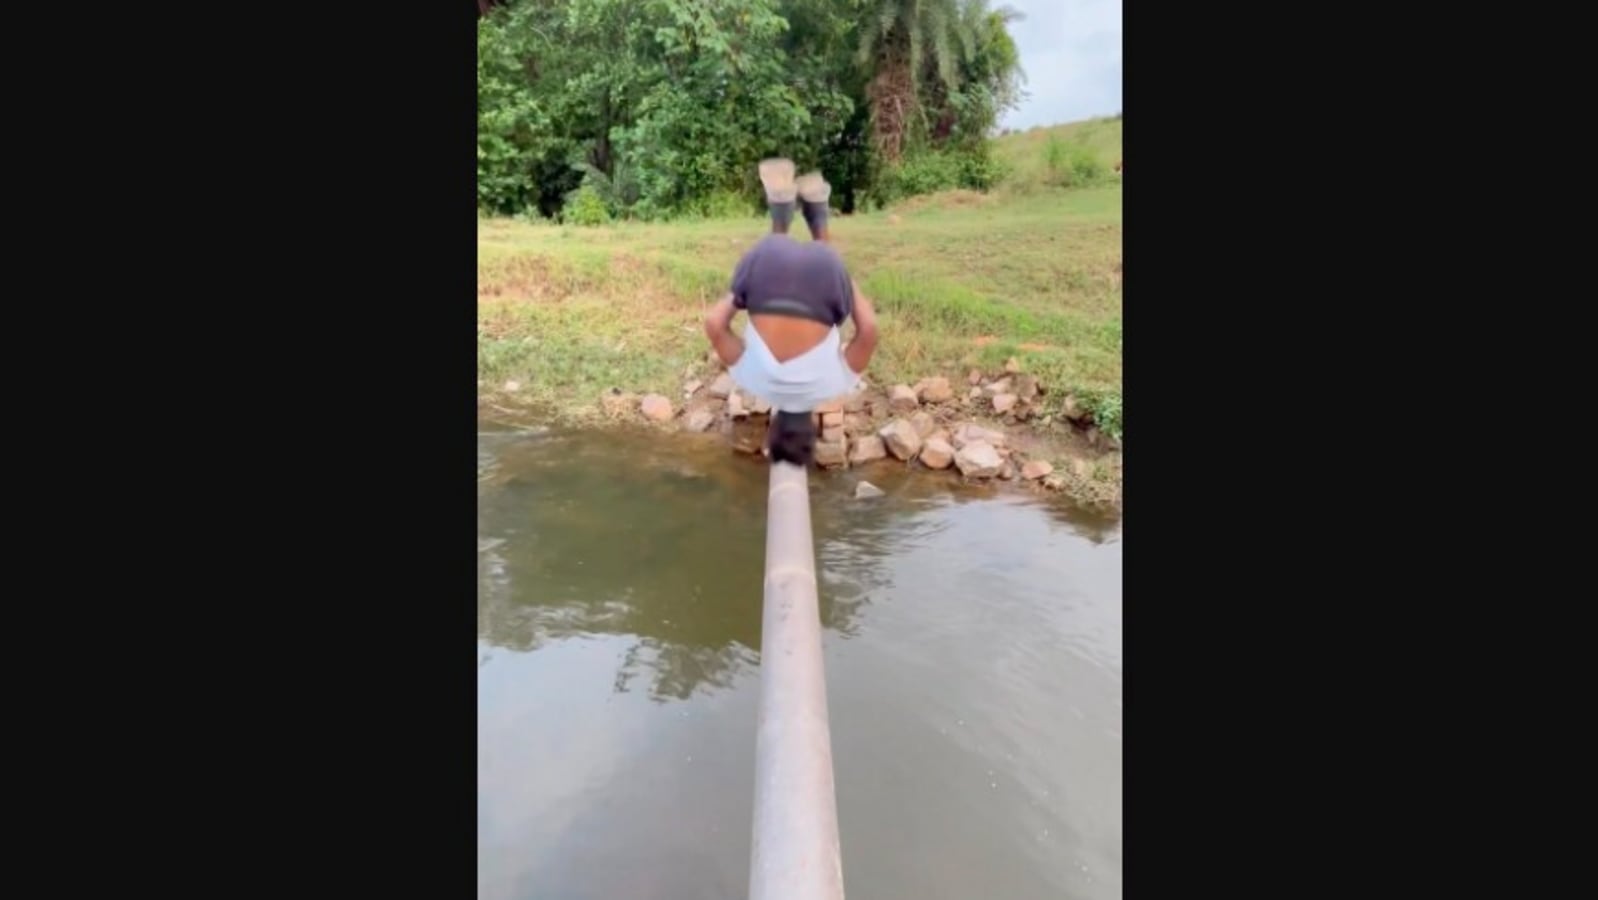 man-fails-while-trying-to-backflip-on-pipe-refuses-to-give-up-watch-what-happens-next